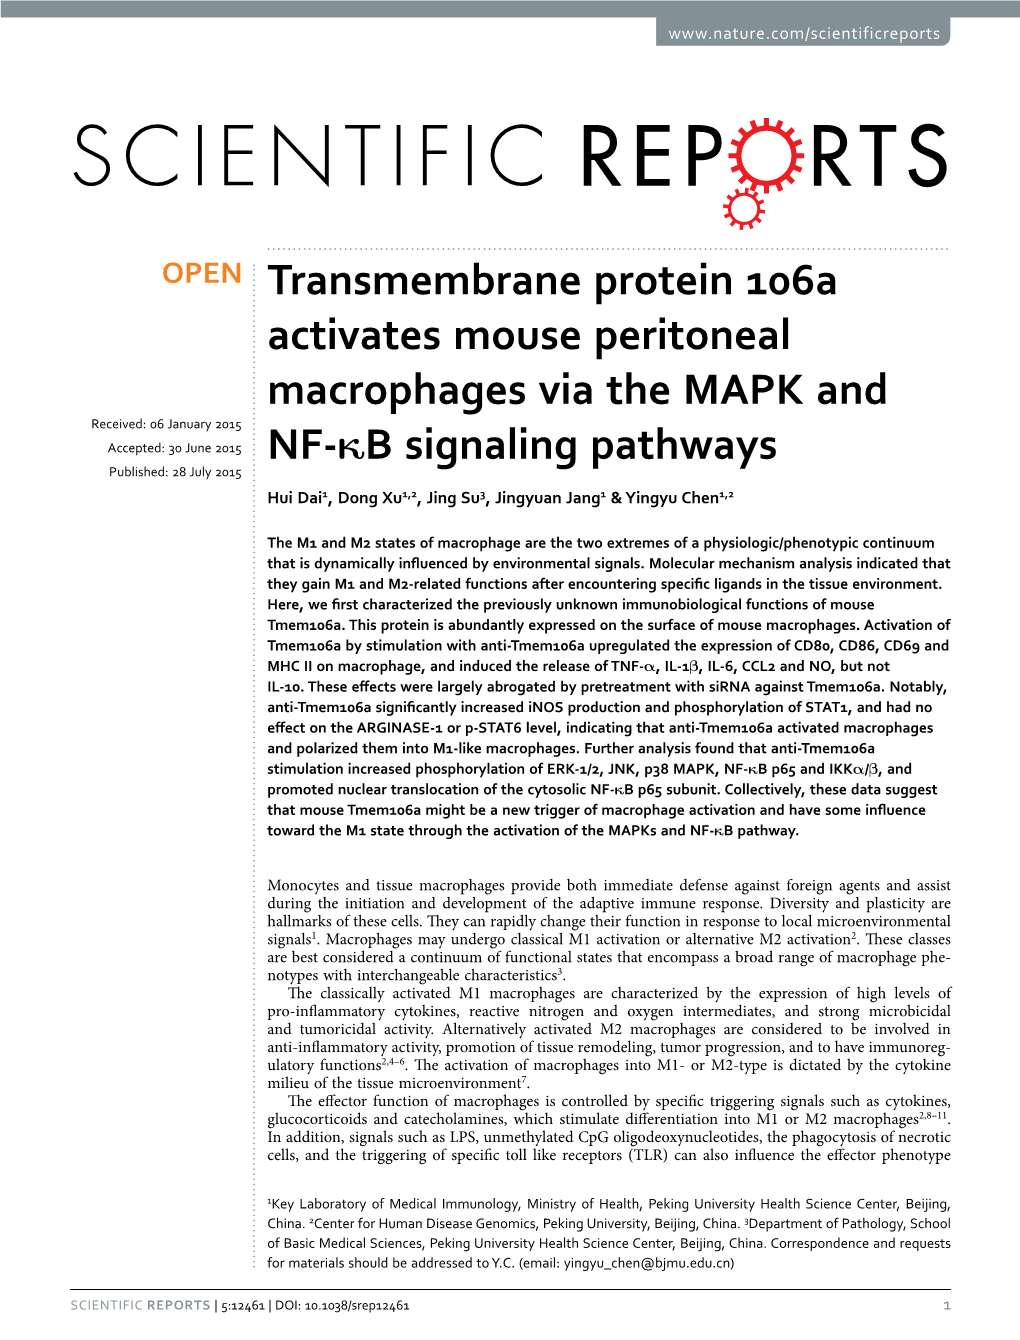 Transmembrane Protein 106A Activates Mouse Peritoneal Macrophages Via the MAPK and NF-Κb Signaling Pathways